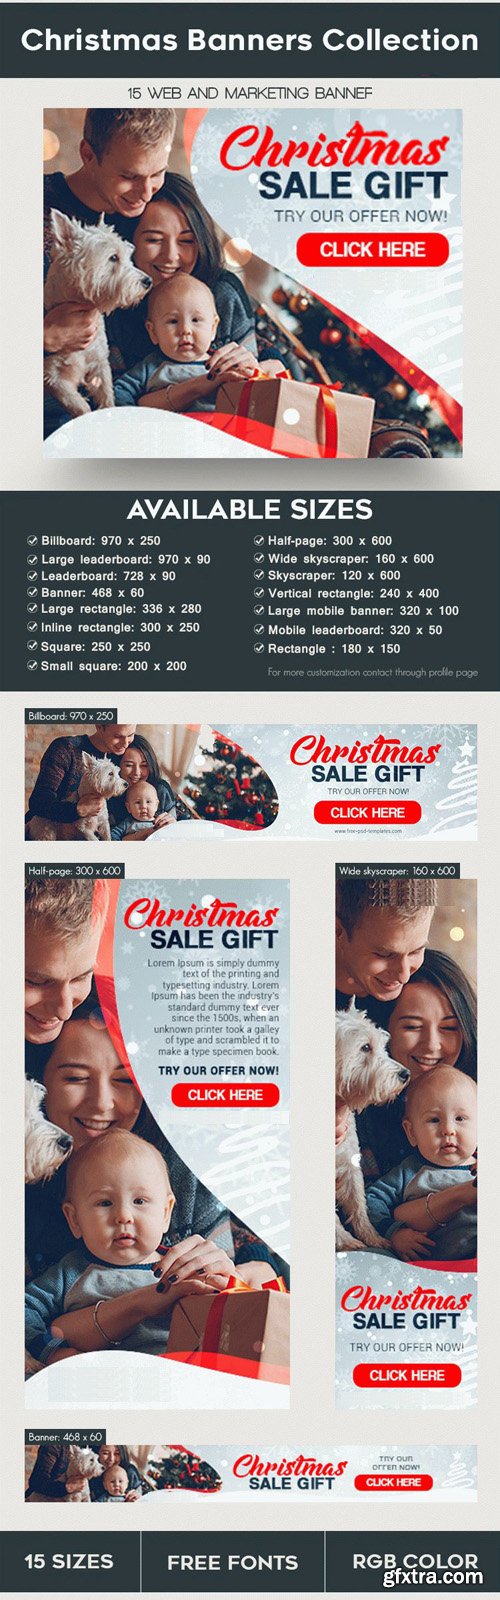 15 Christmas Banners Collection PSD Templates